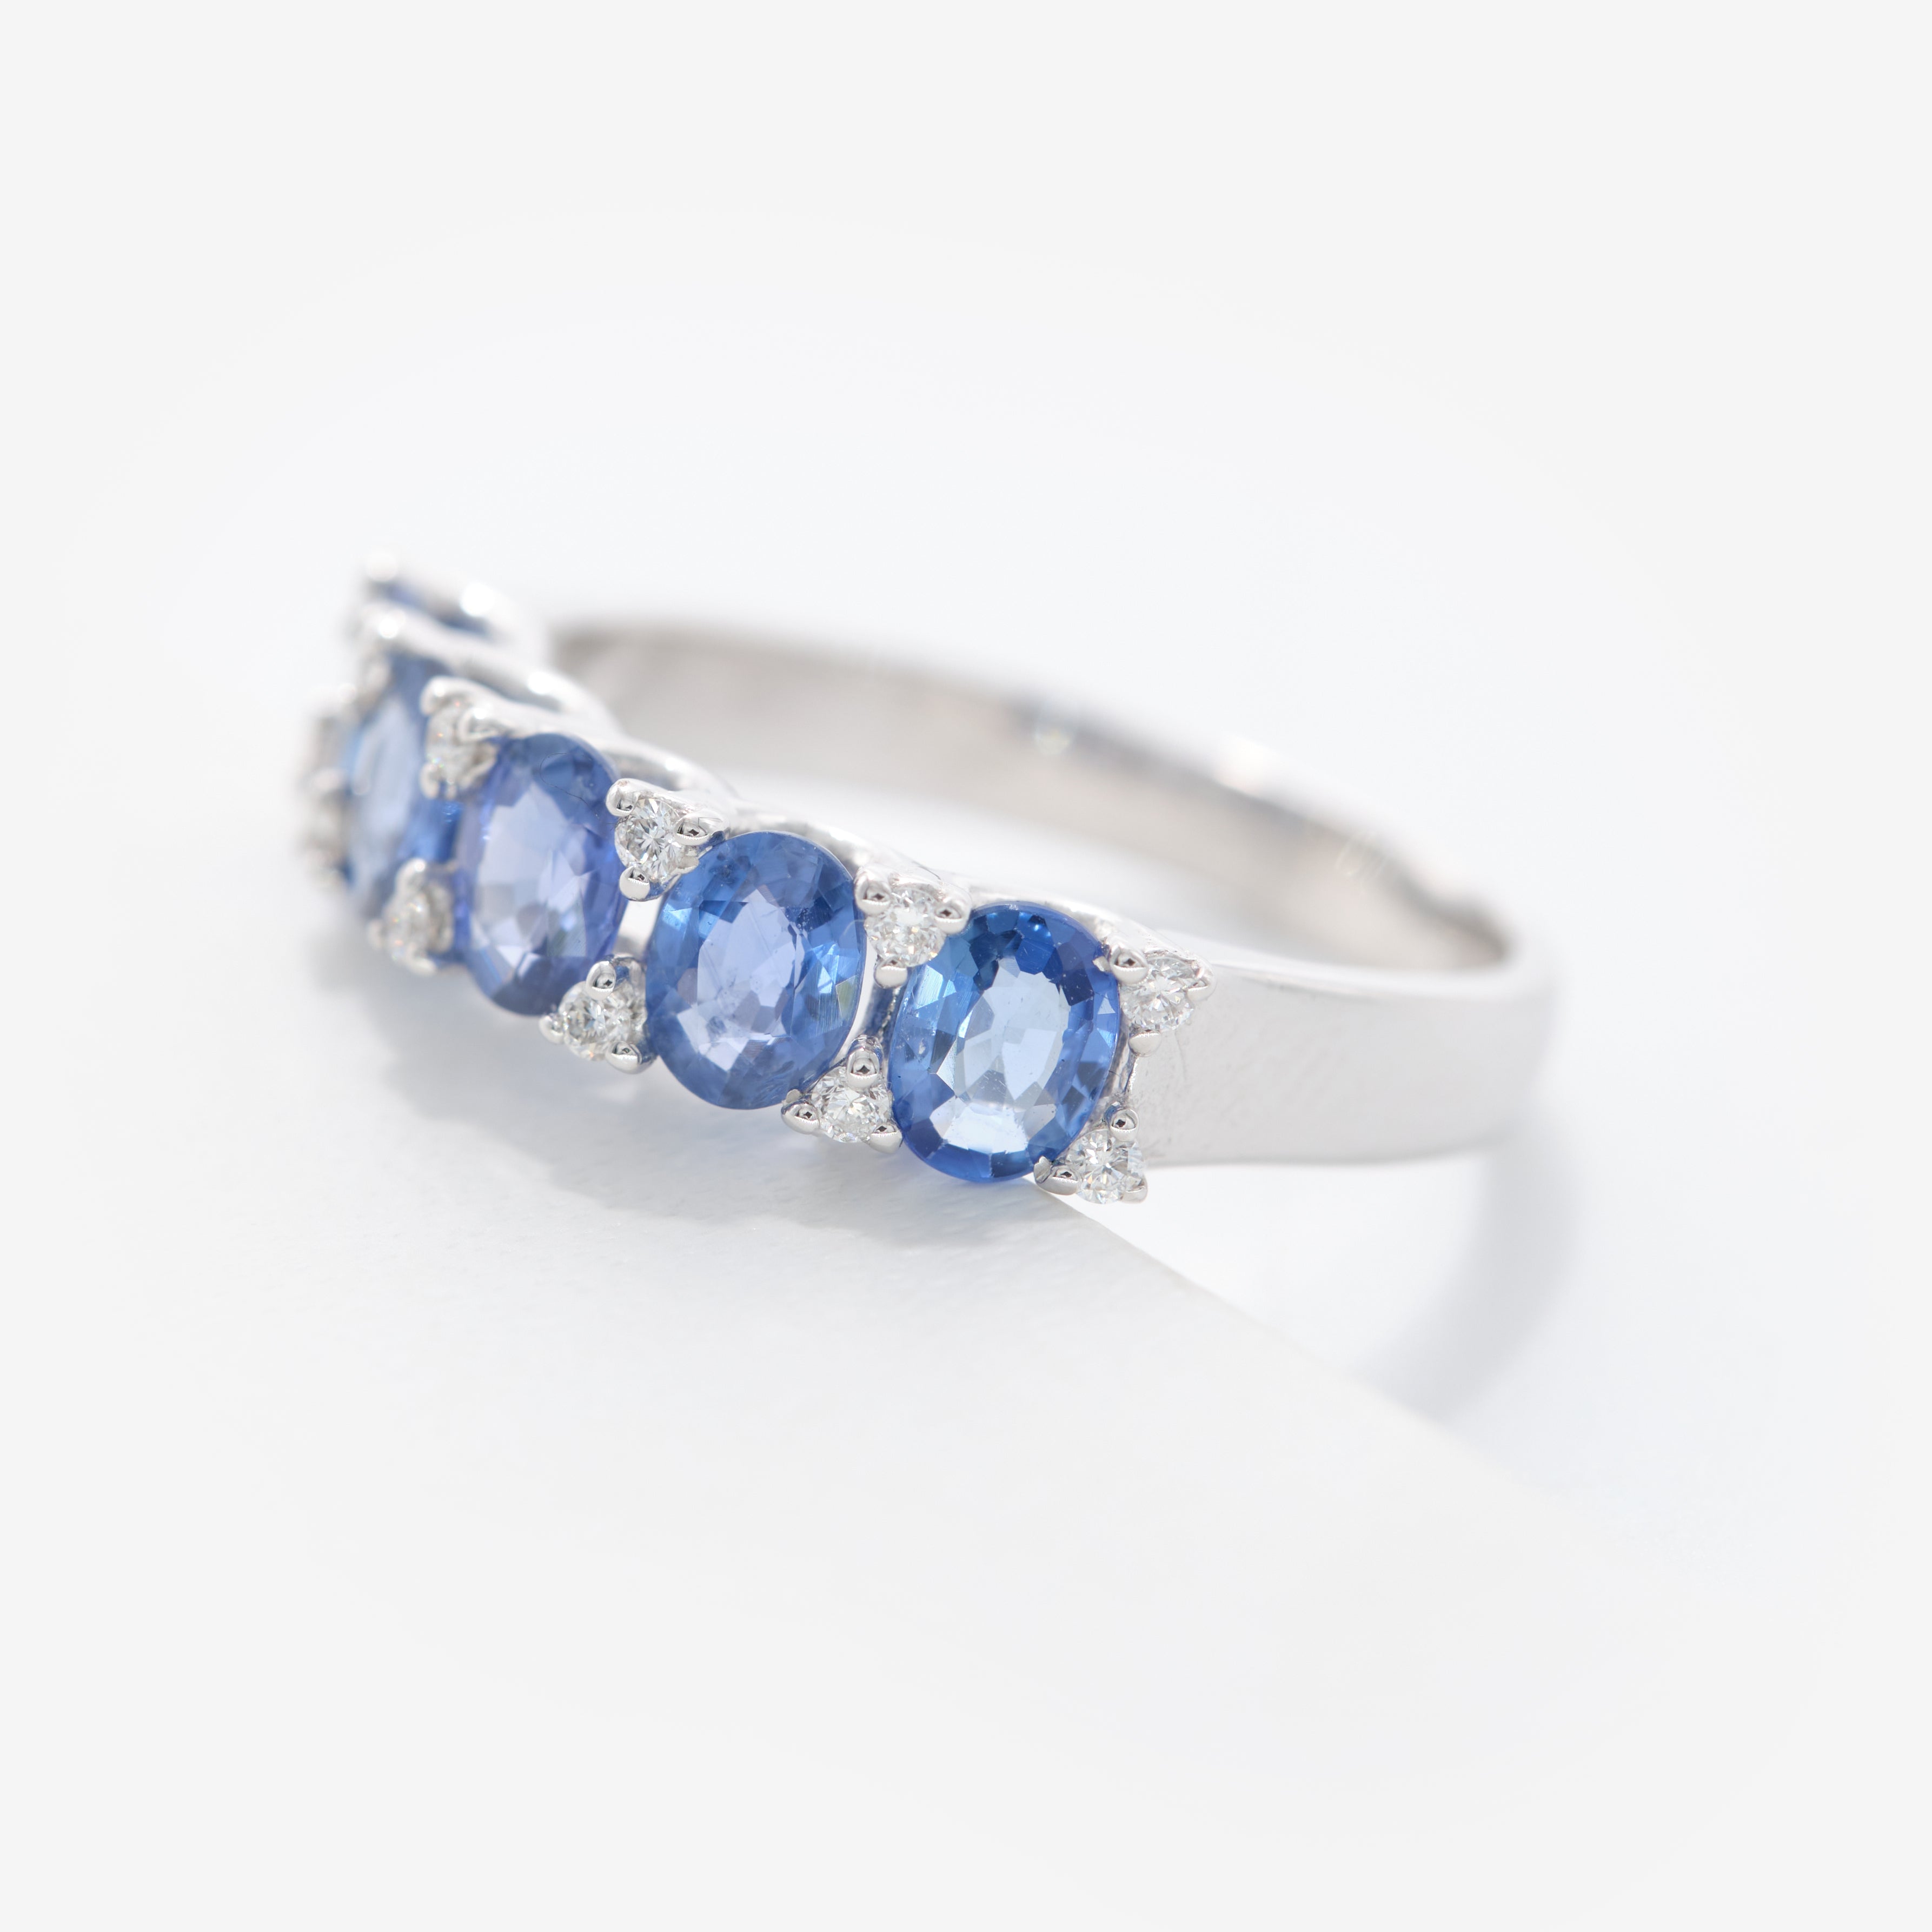 Lena ring with sapphires and diamonds